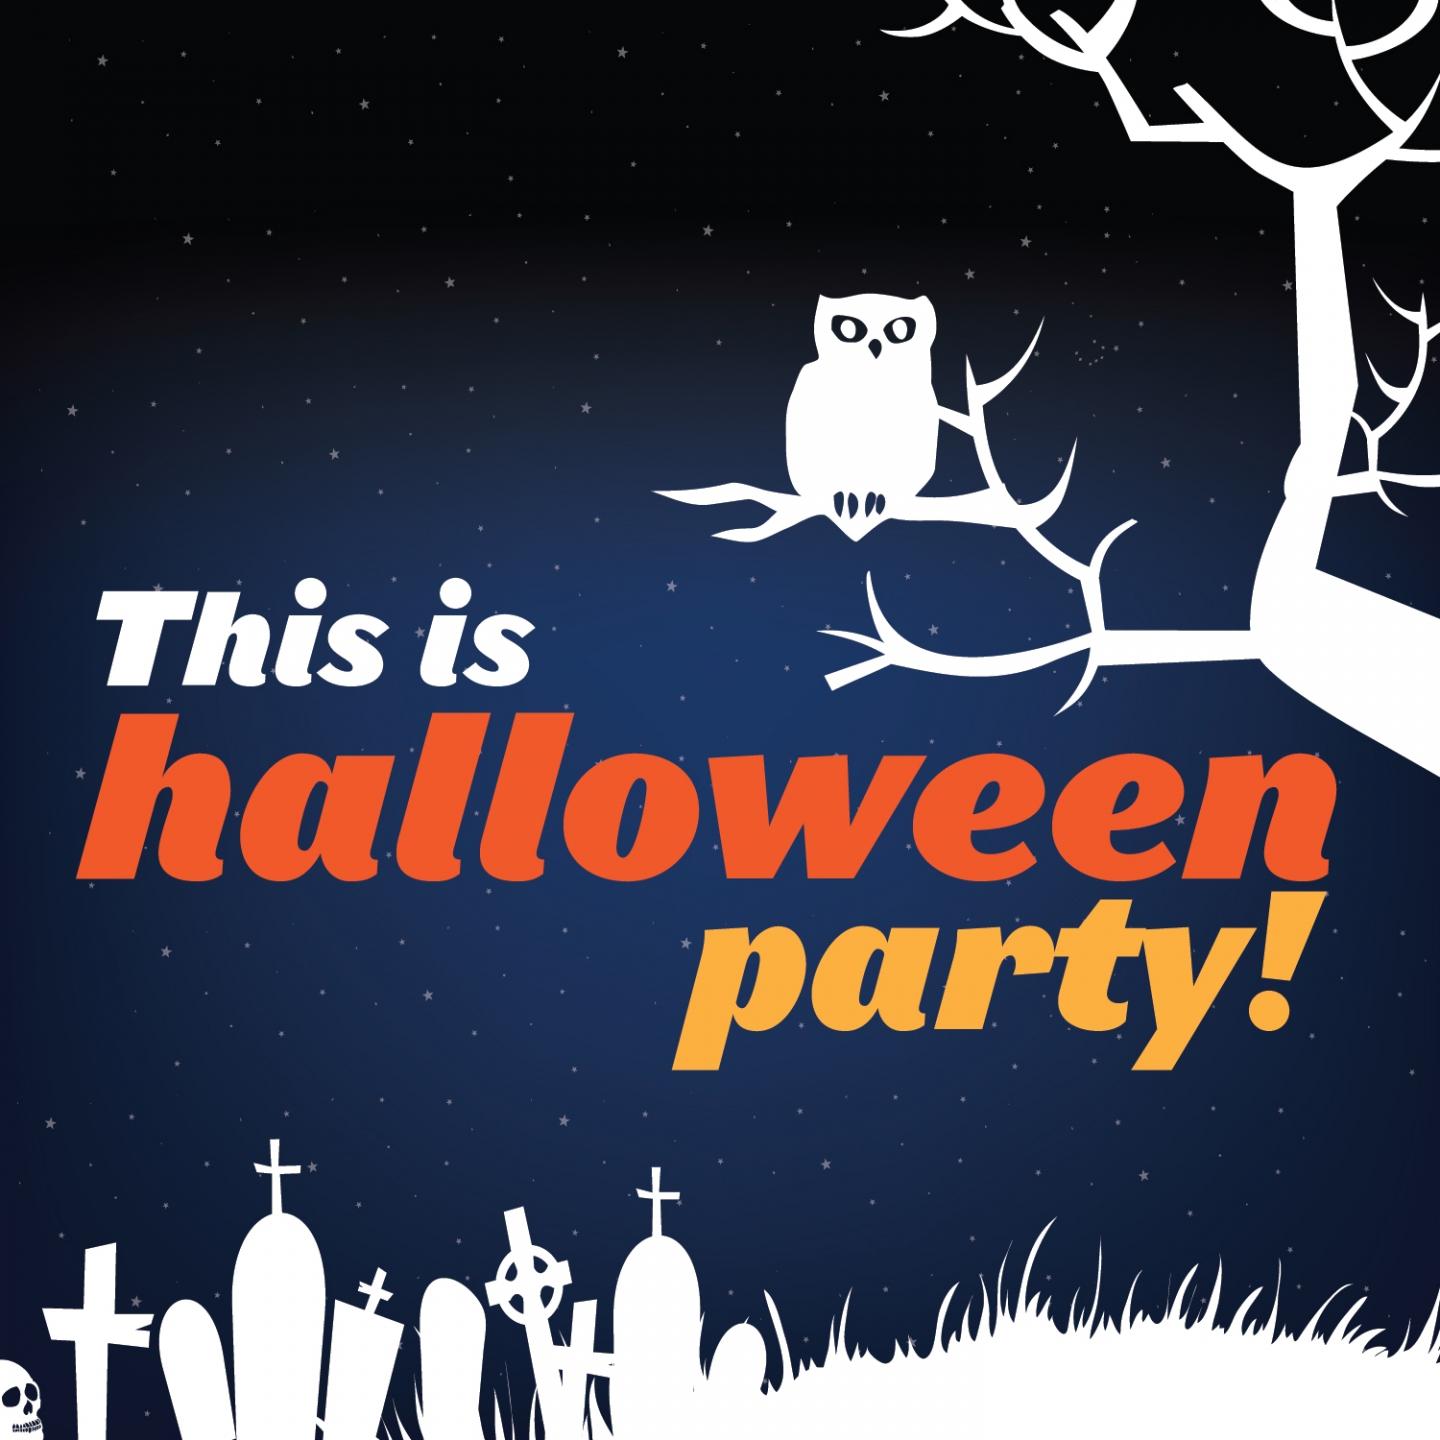 This Is Halloween Party!